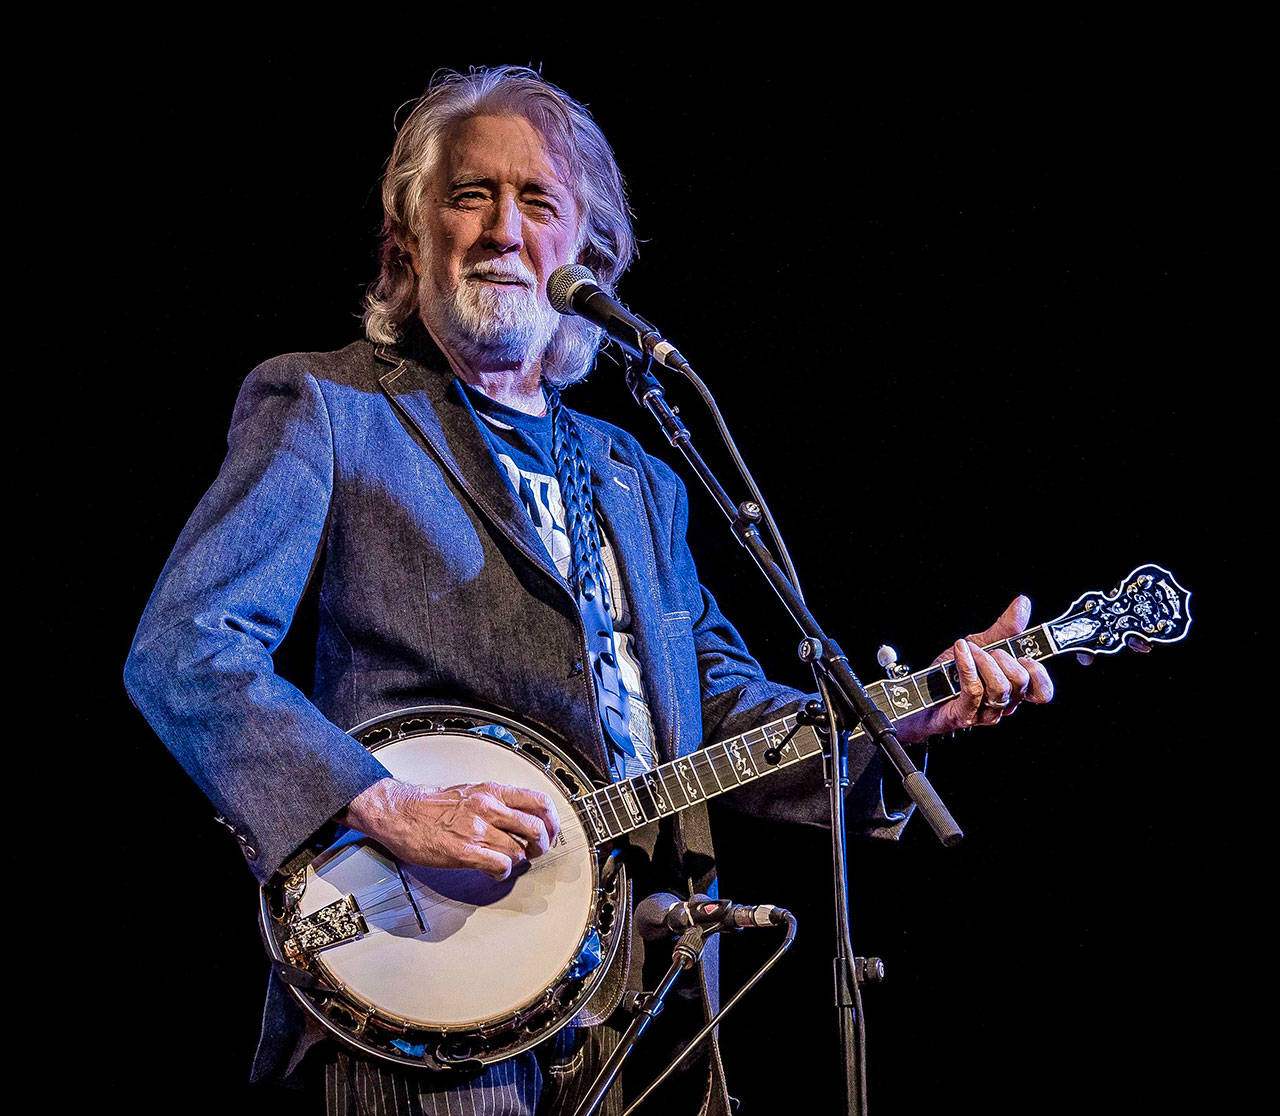 Photo courtesy of Wendy Tyner | Grammy Award-winning multi-instrumentalist John McEuen, founding member of the famed Nitty Gritty Dirt Band, will perform a special one-night-only house show on Bainbridge at 7 p.m. Monday, July 2.